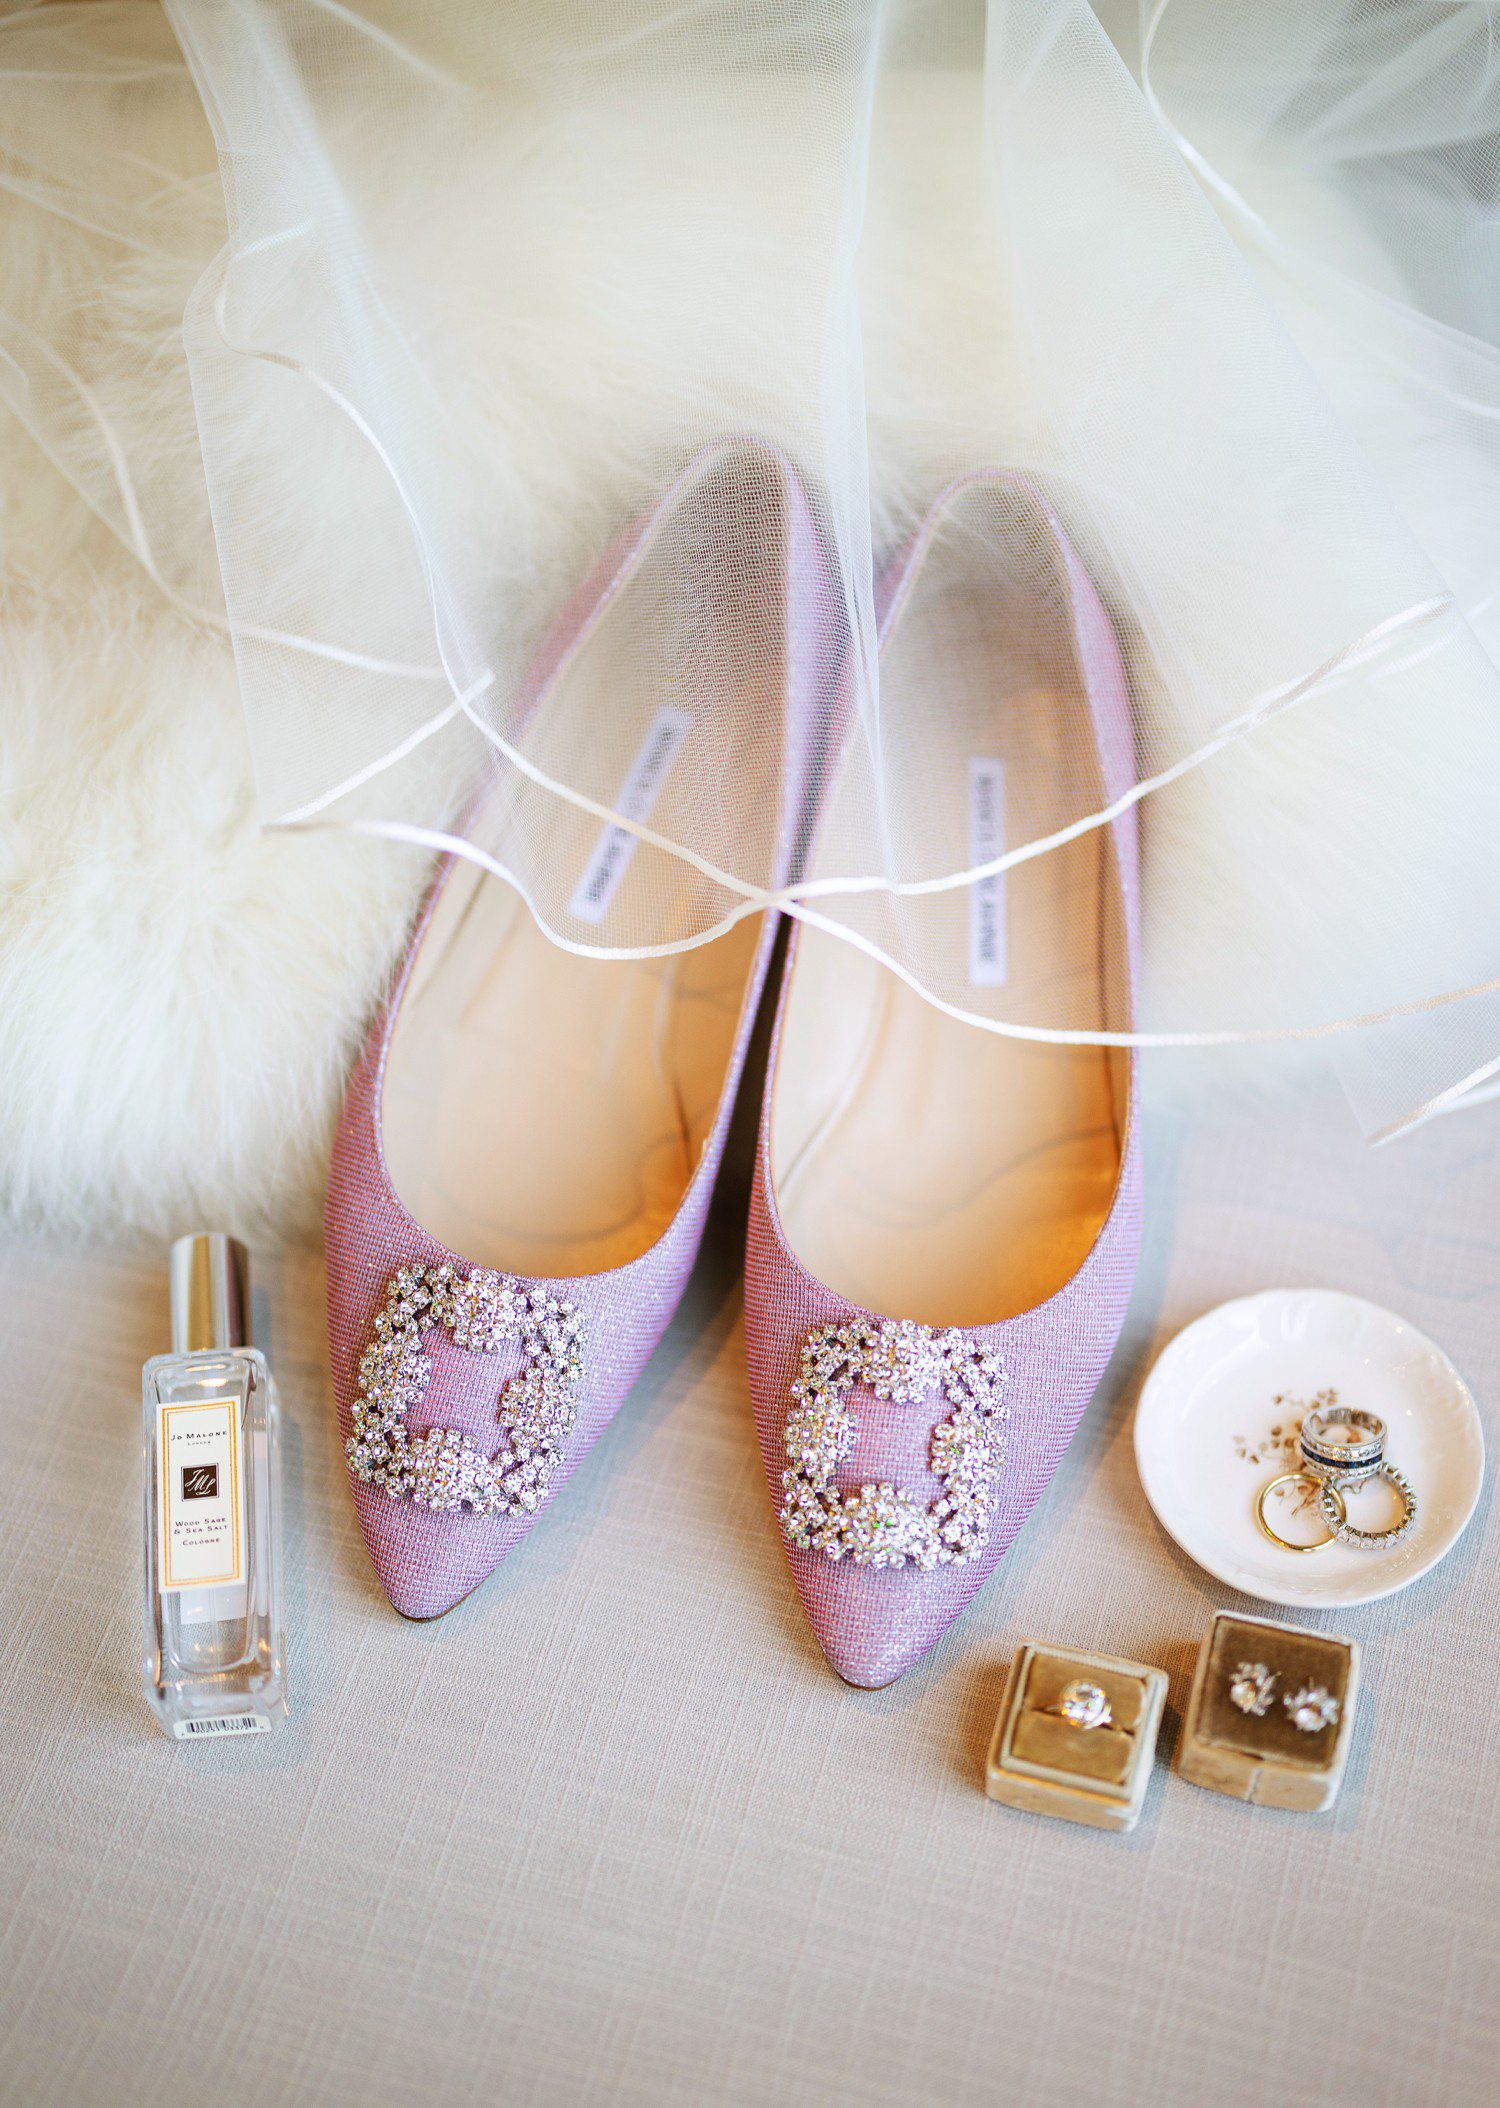 Bride wedding details with pink Manolo Blahnik shoes